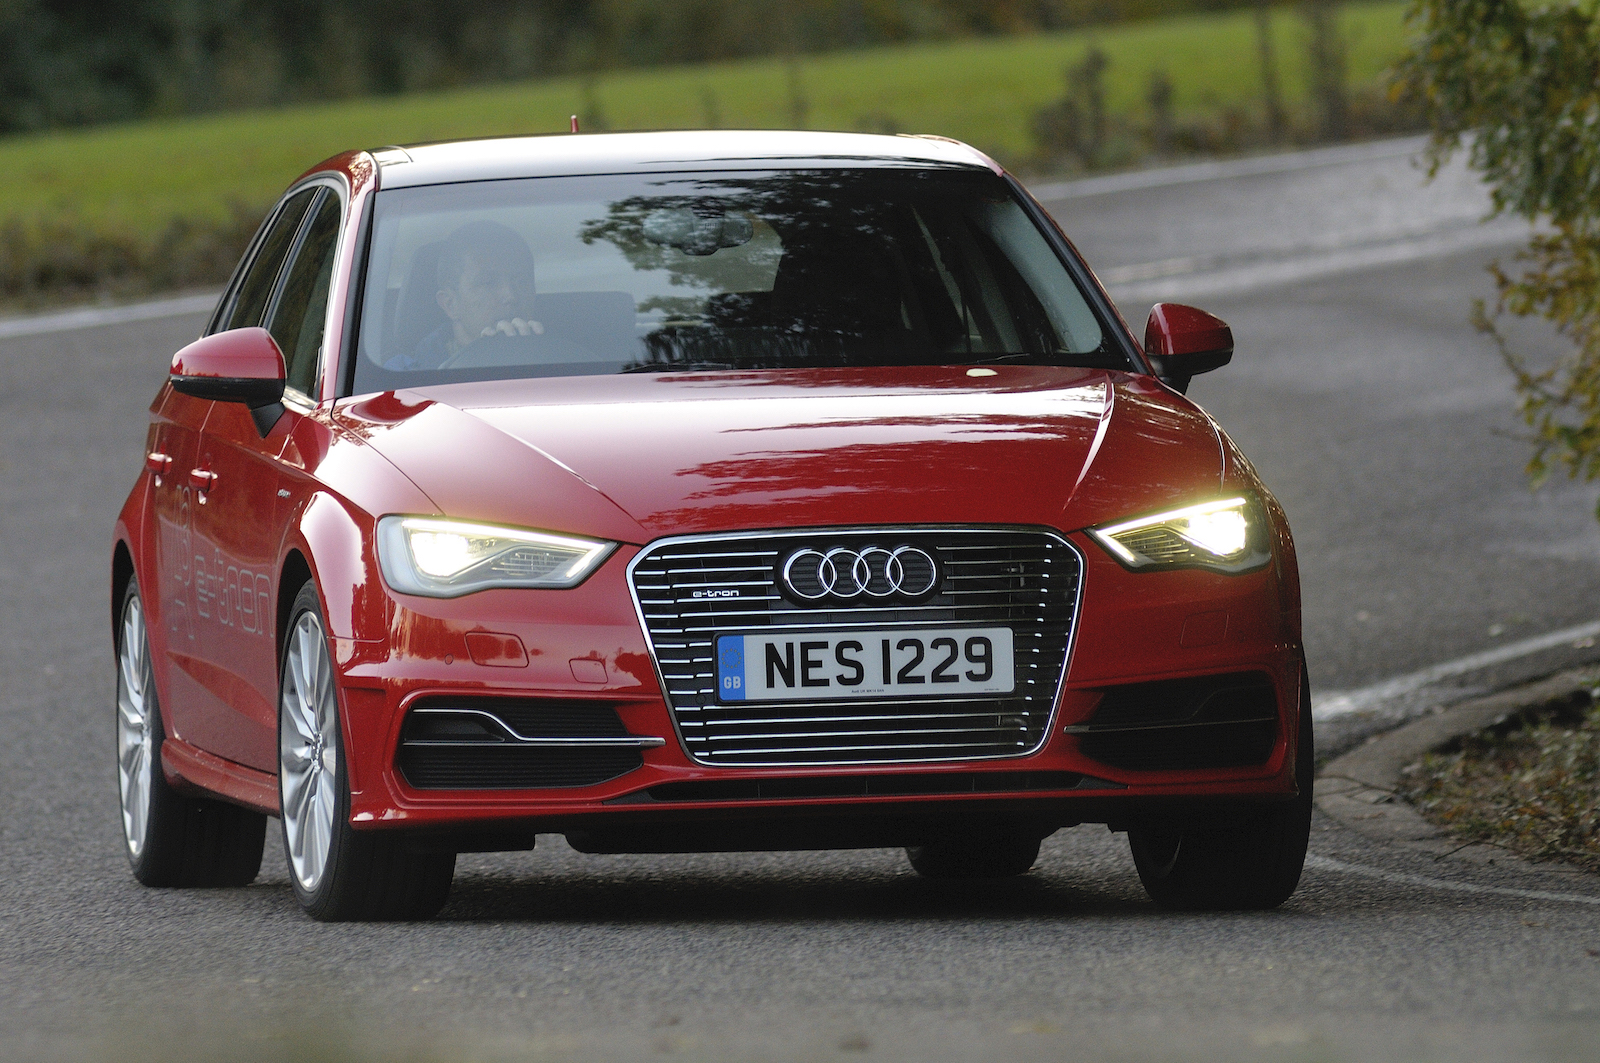 Audi A3 Sportback  The Speed, Luxury & All Your Questions Answered